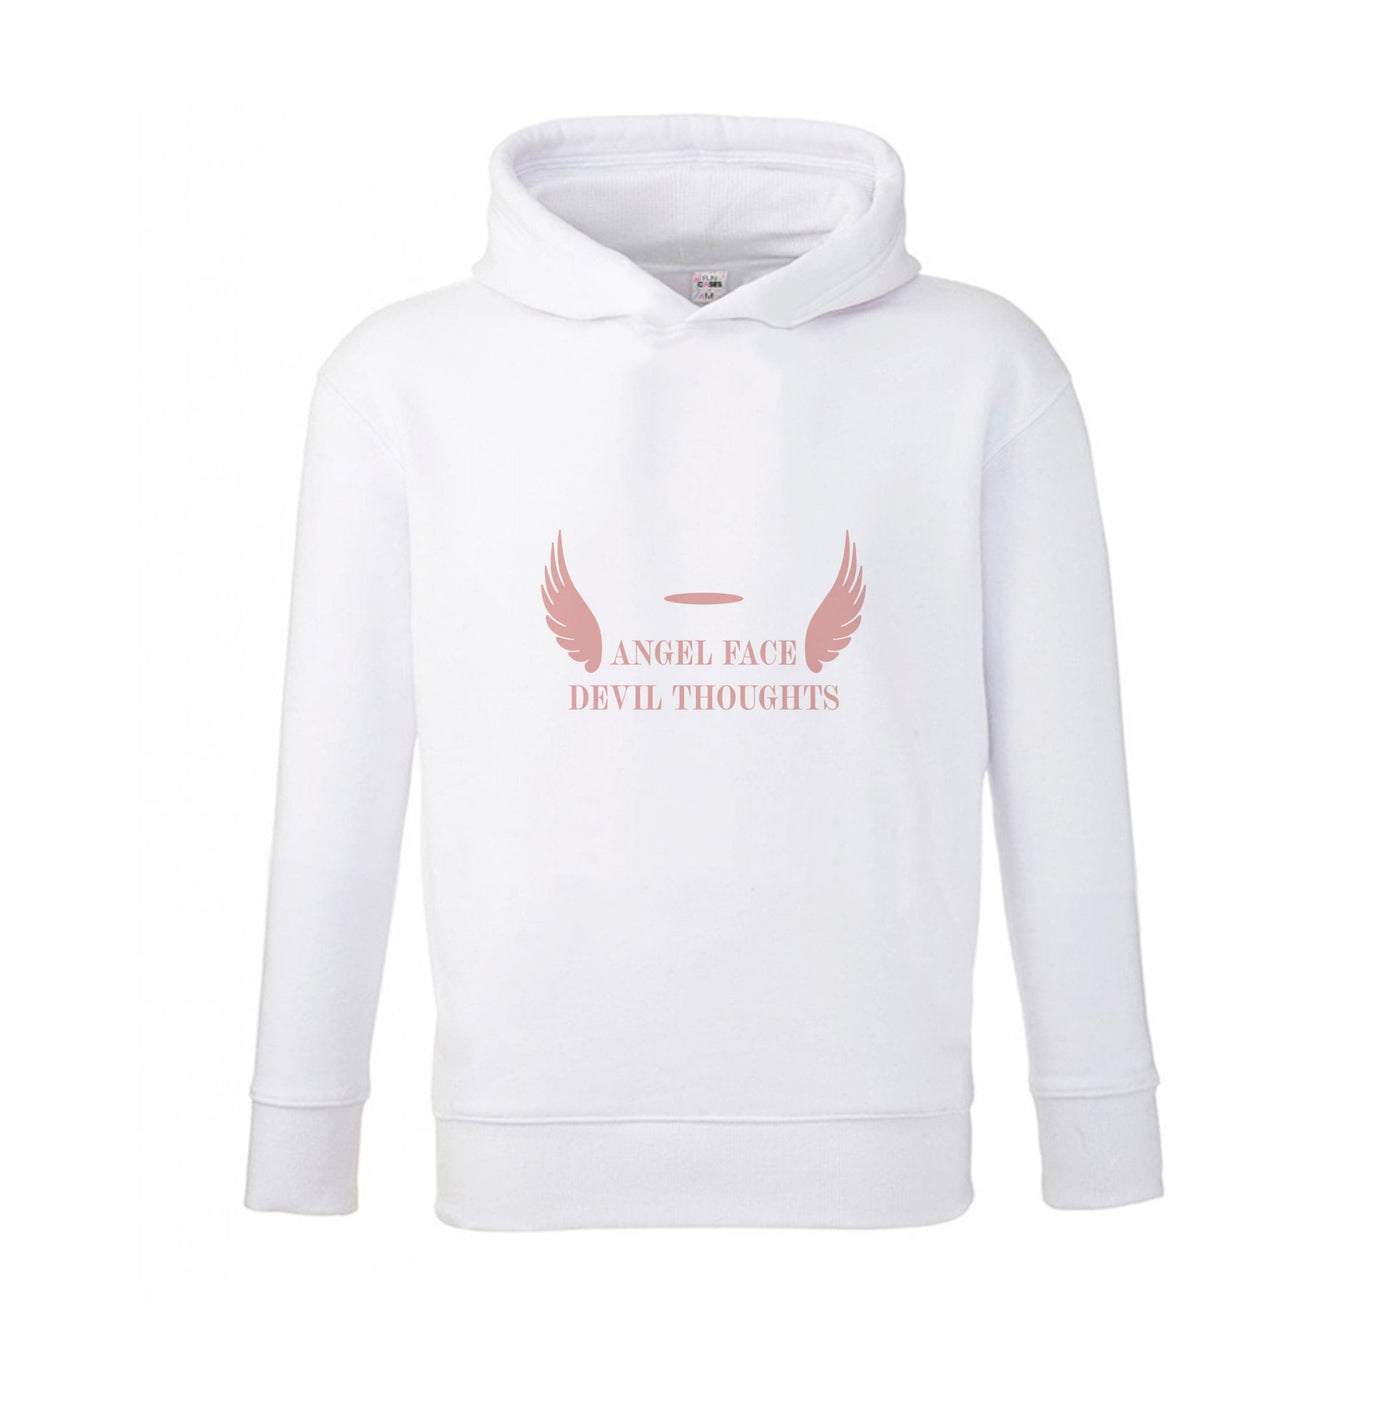 Angel Face Devil Thoughts Kids Hoodie